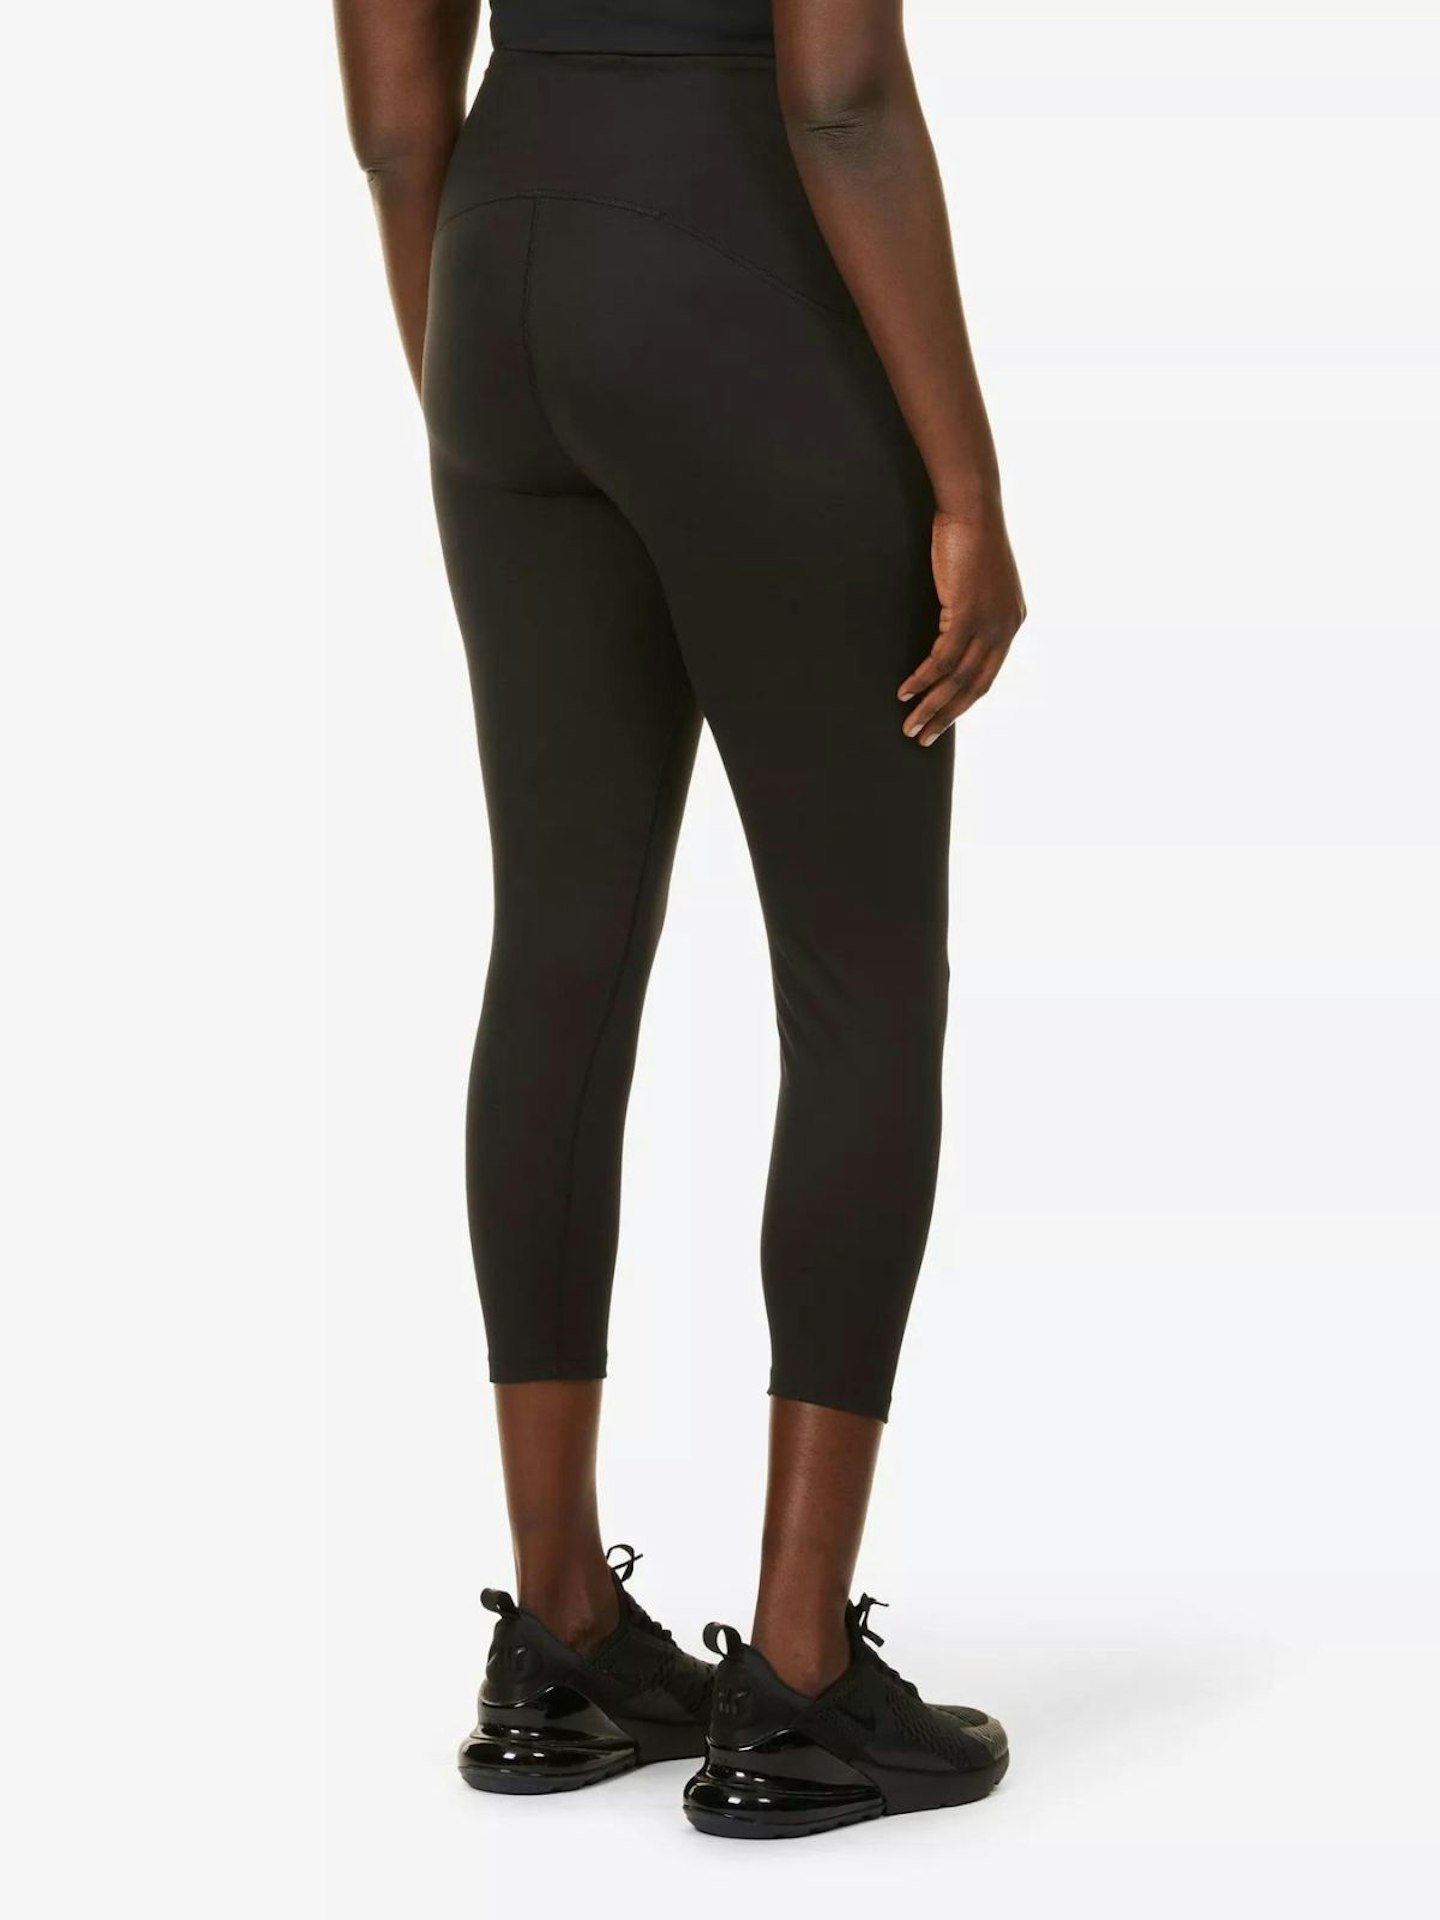 Rushed Peach Lift High-Waisted Leggings with Side Pockets, Women's